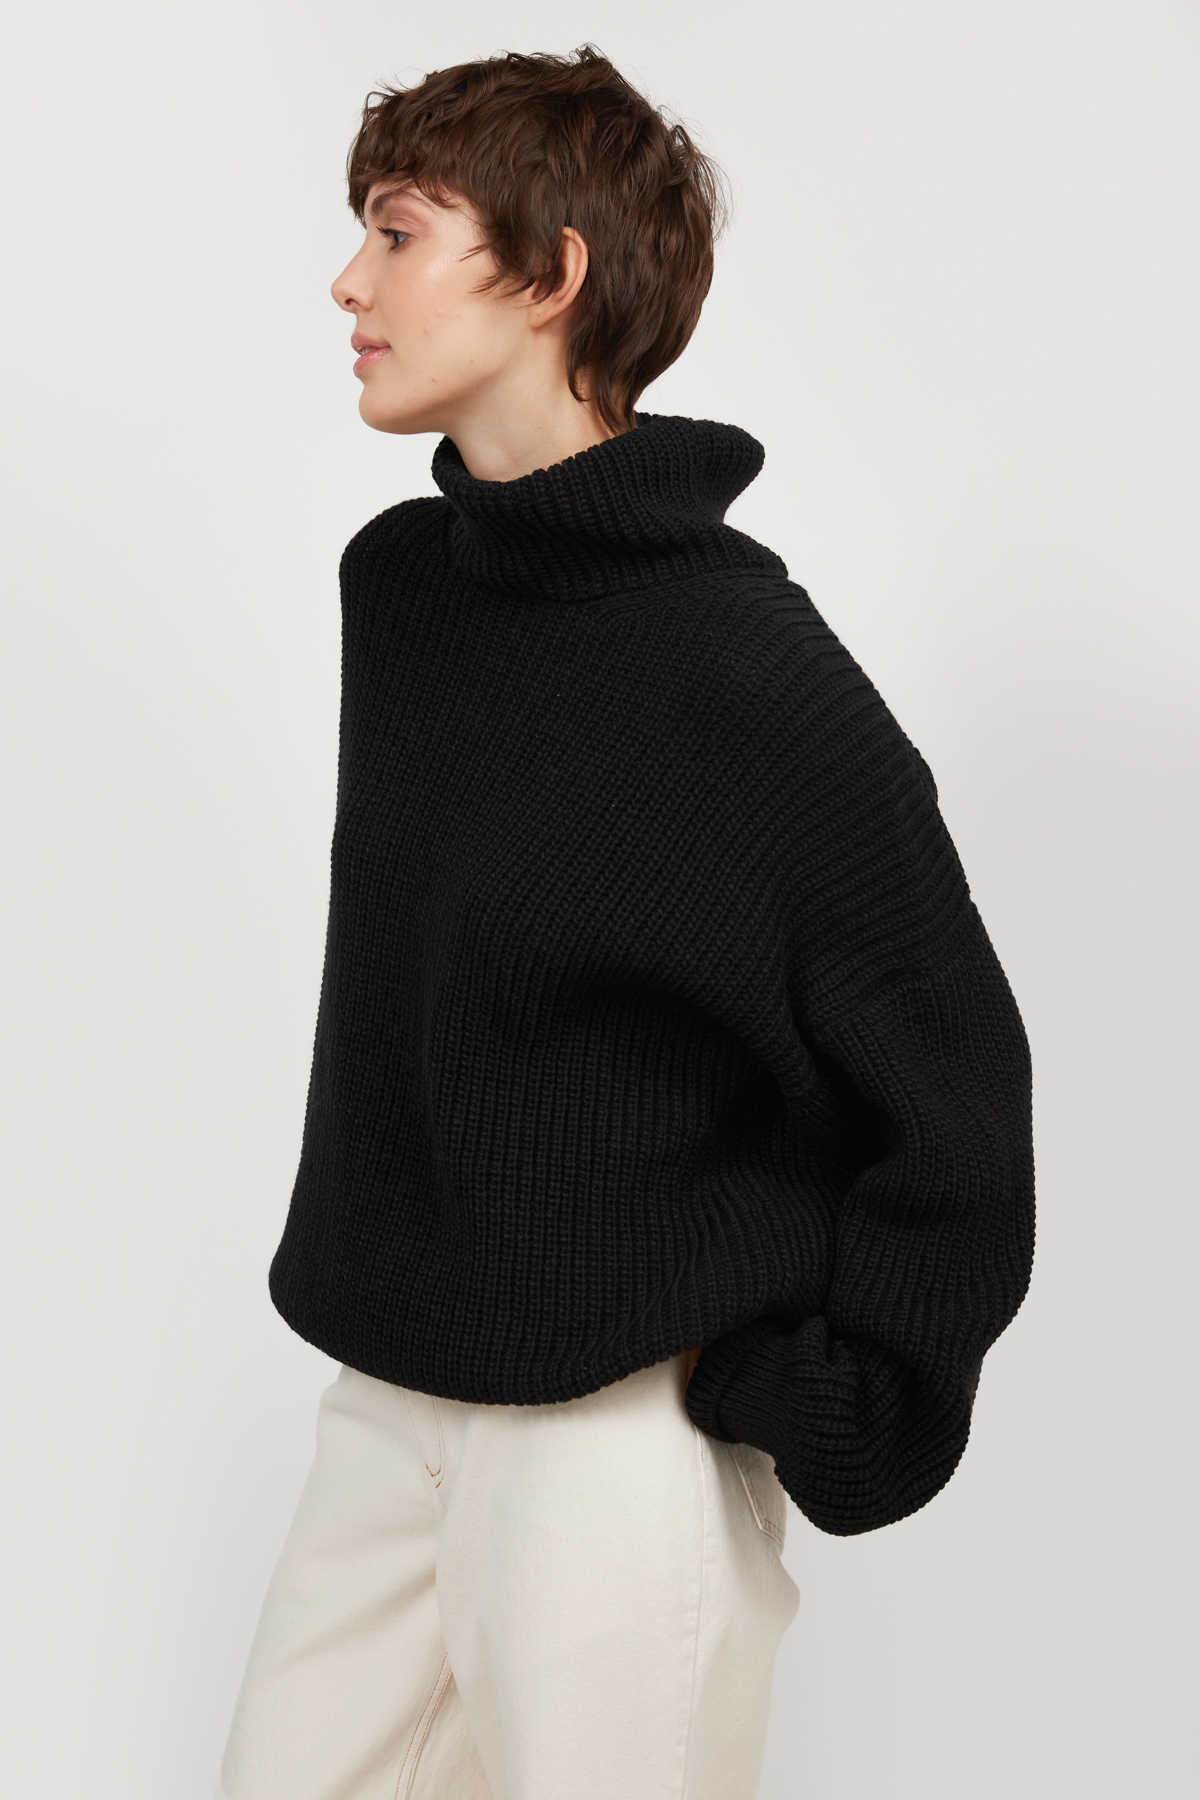 Knitted black sweater with wool, photo 3